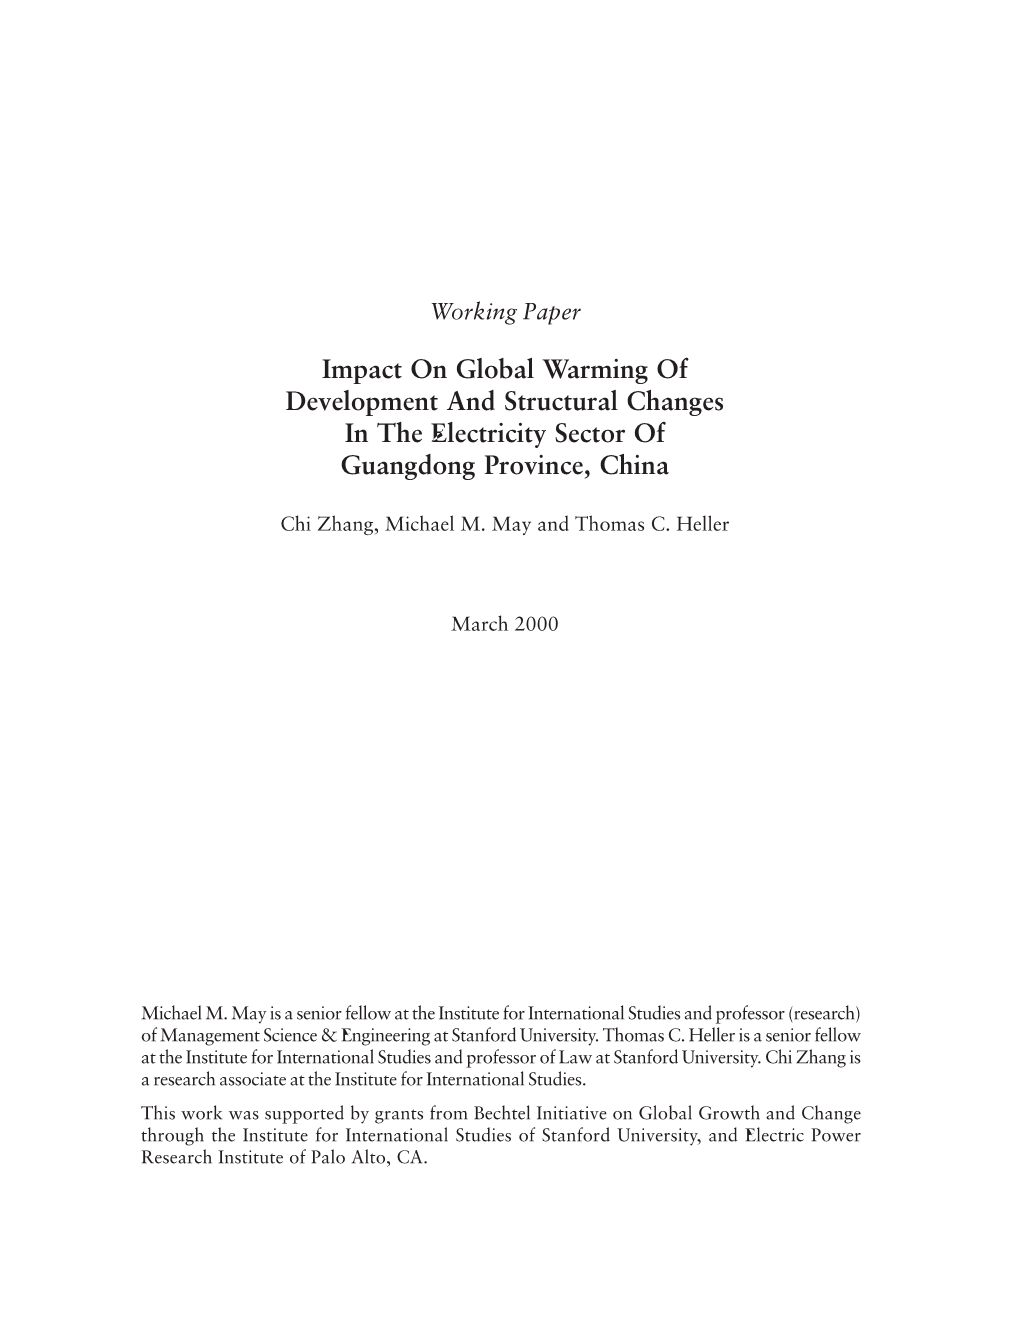 Global Warming of Development and Structural Changes in the Electricity Sector of Guangdong Province, China